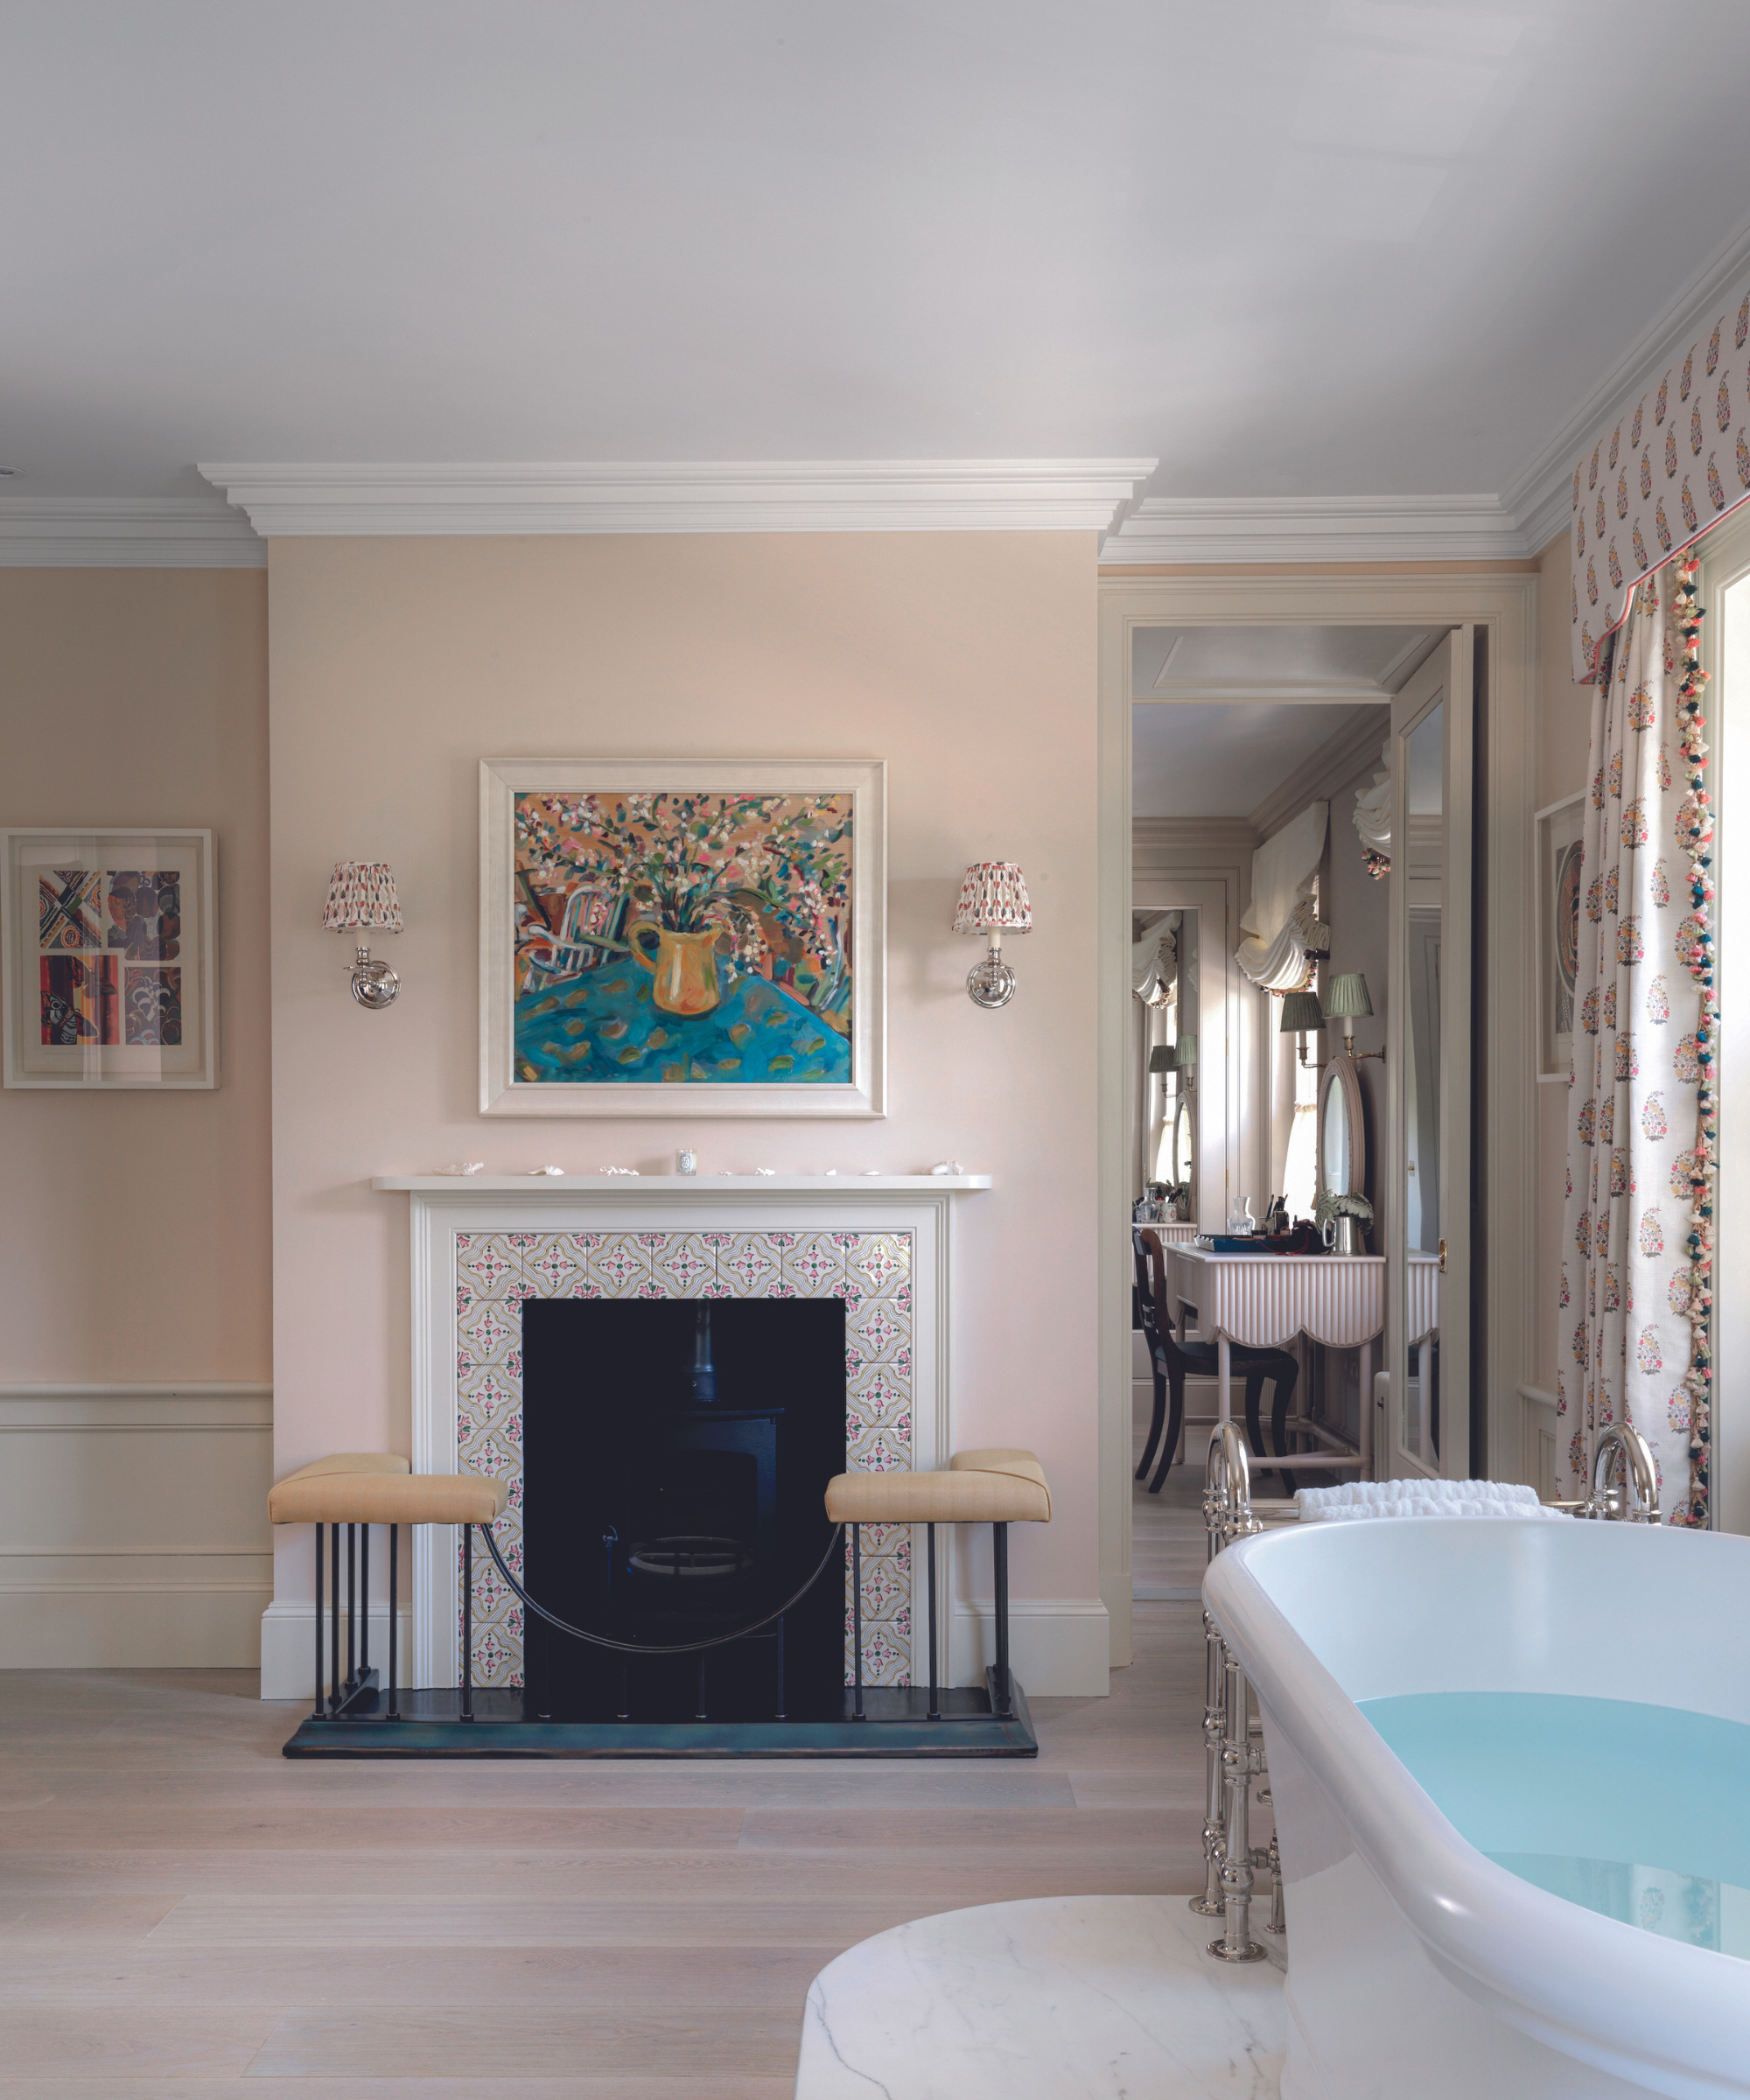 pale pink walls in bathroom with fireplace and freestanding bath